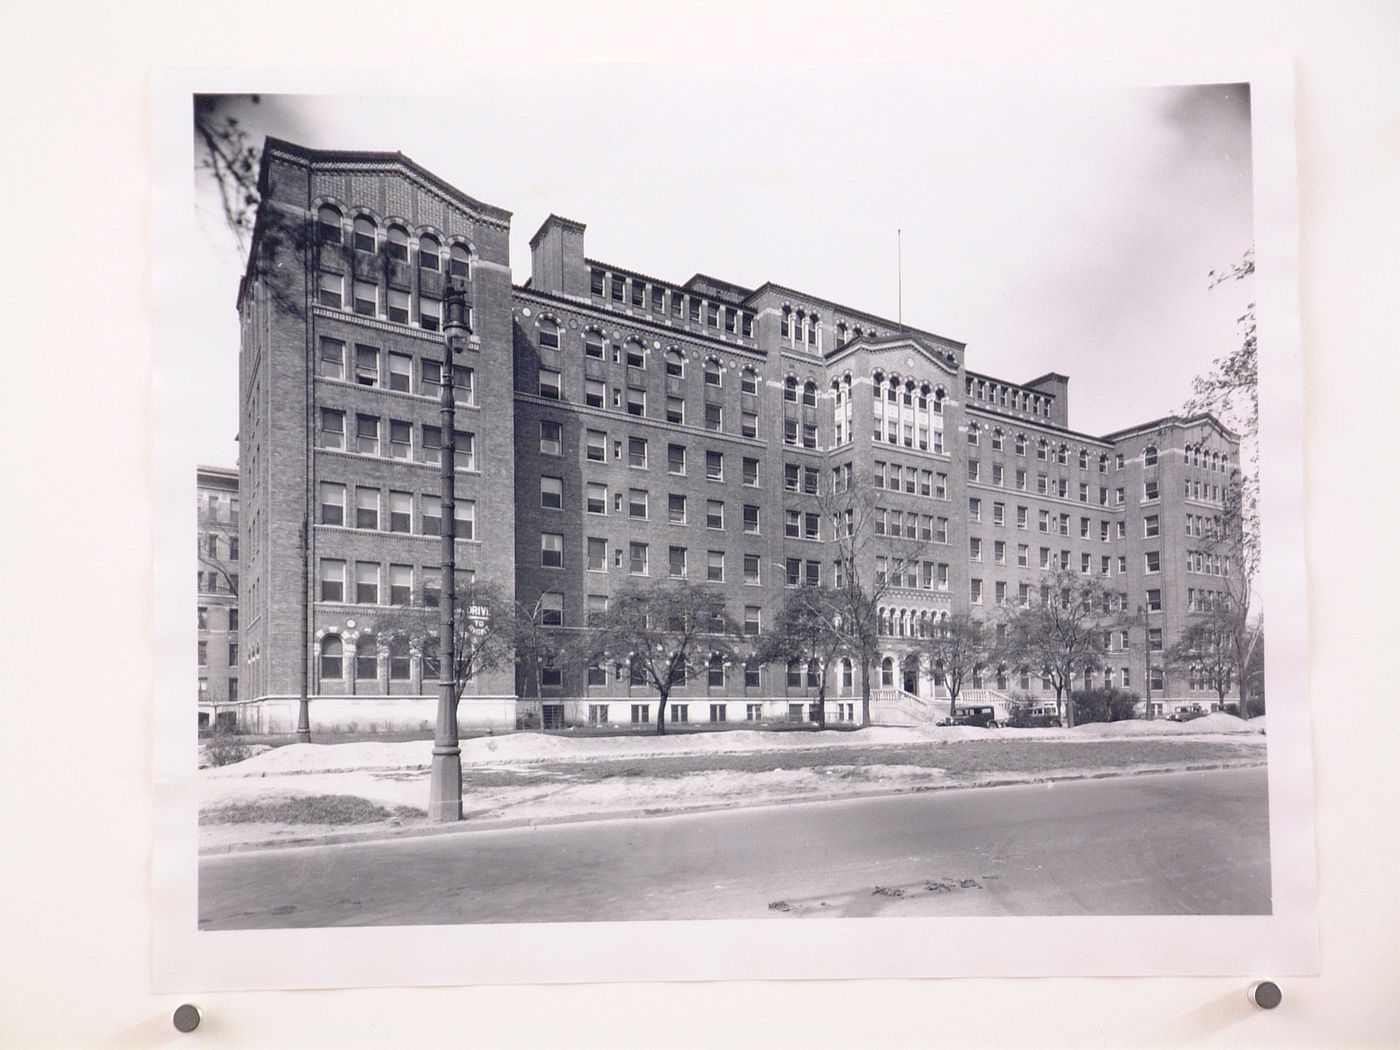 View of principal façade of the Brush Street Wing from across the street, Harper Hospital (now the Harper University Hospital), Brush Street, Detroit, Michigan